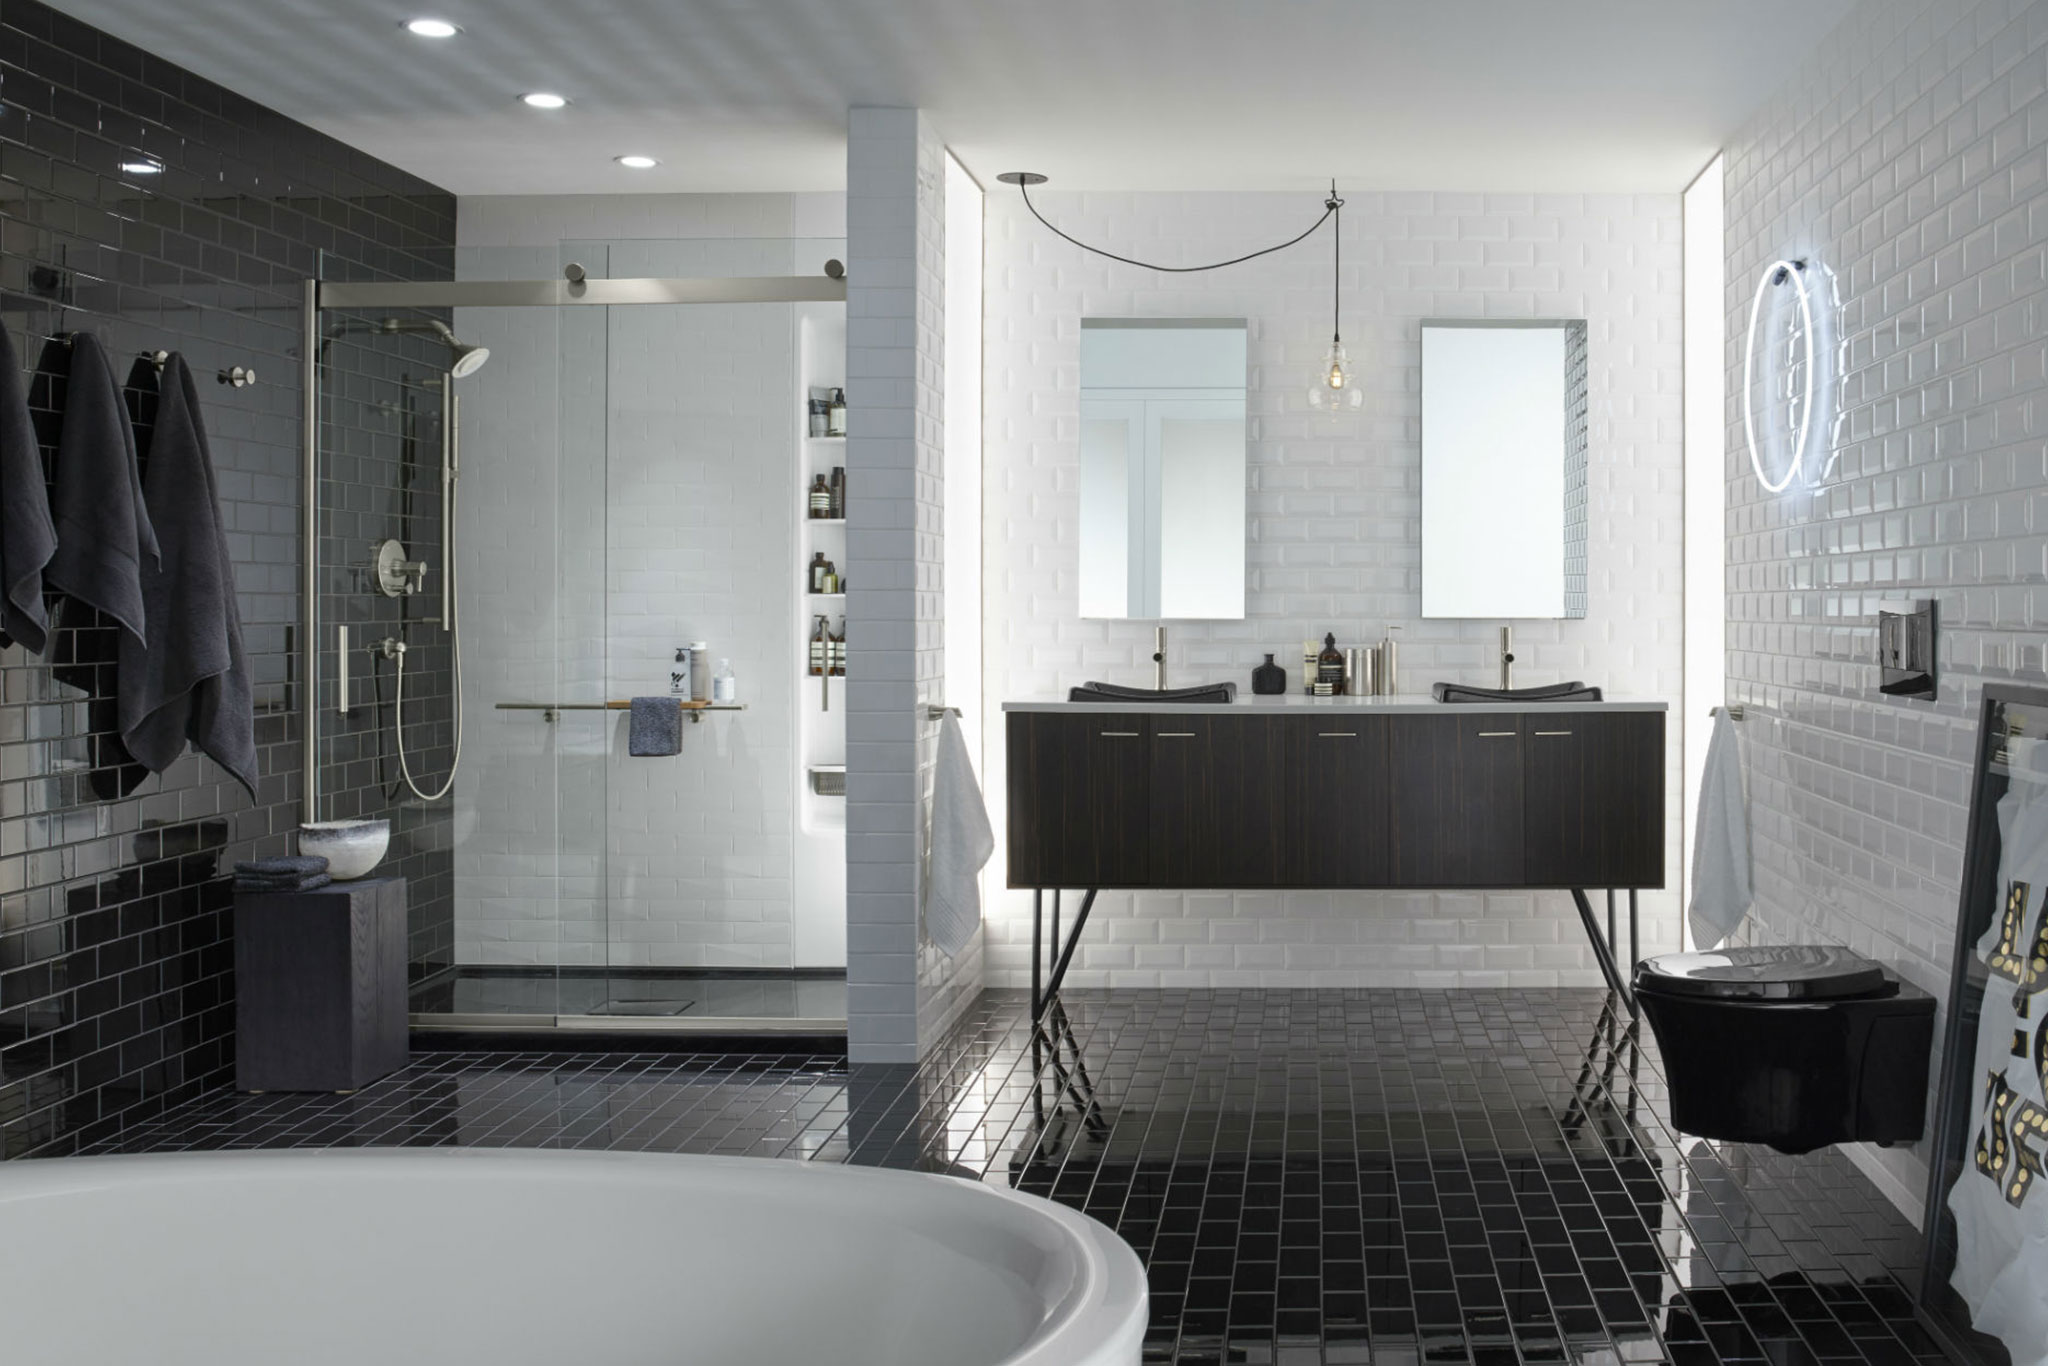 Bathroom with white tile walls and black tile floor